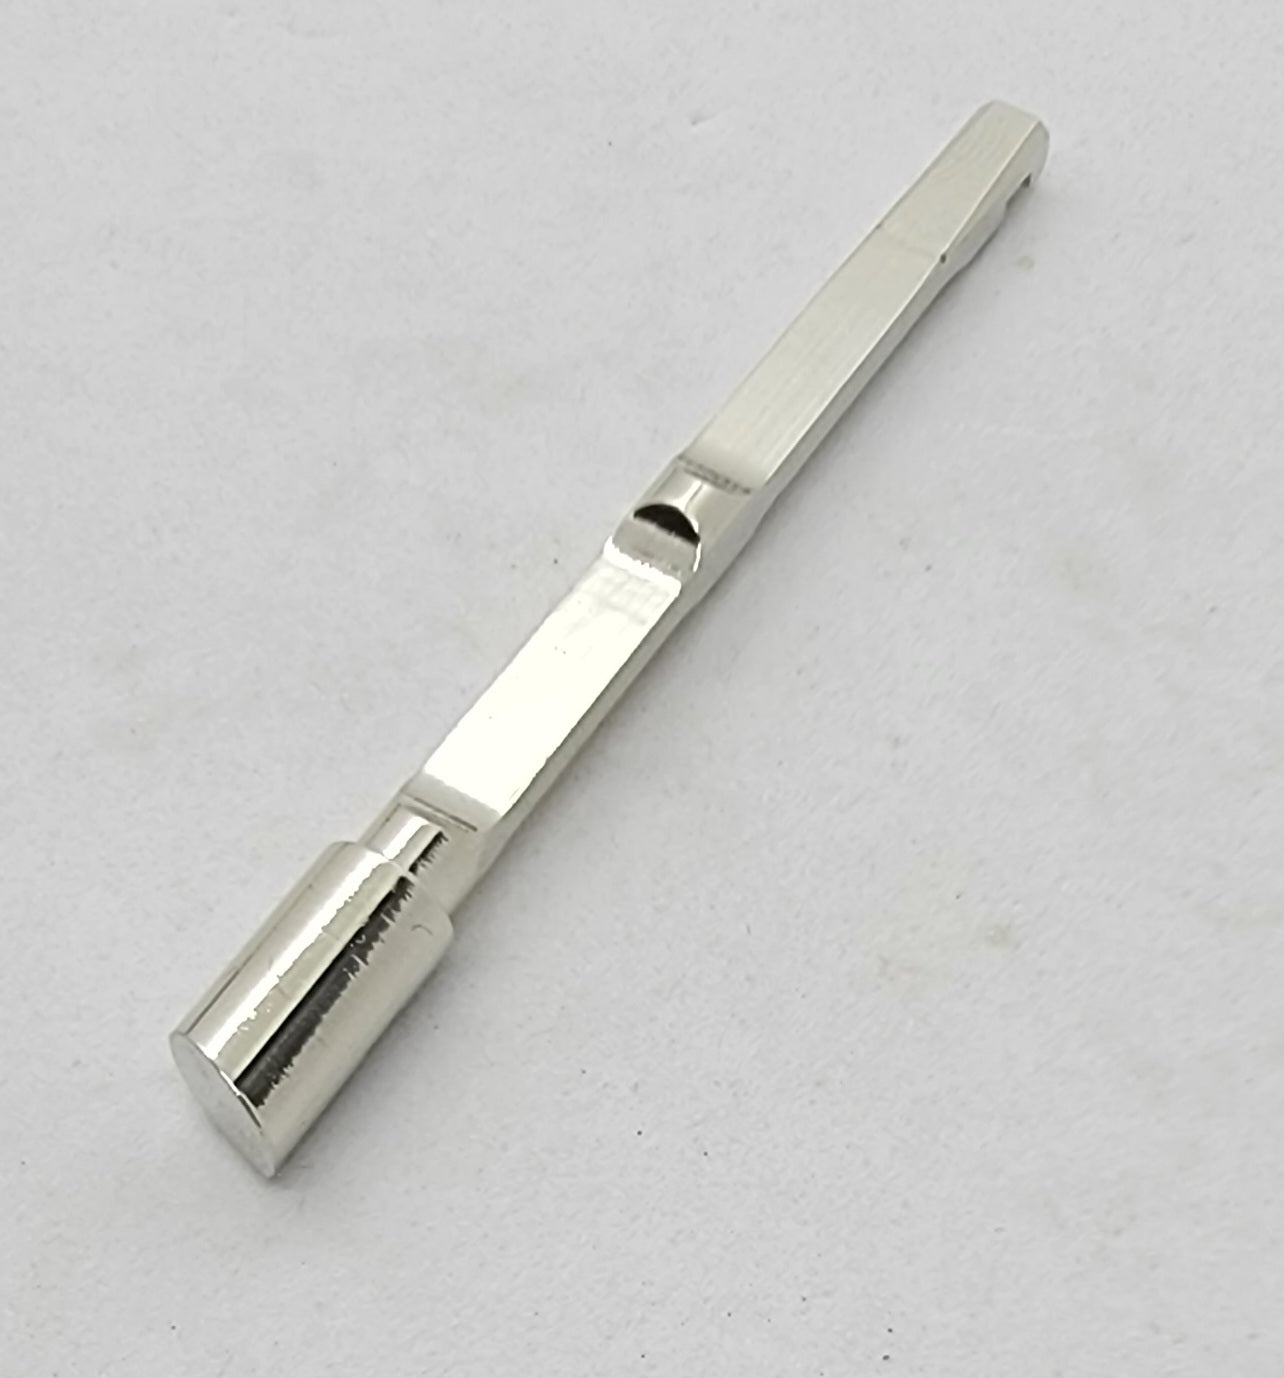 1911 45ACP Extractor - Polished Gold - compatible with standard 45ACP 1911s